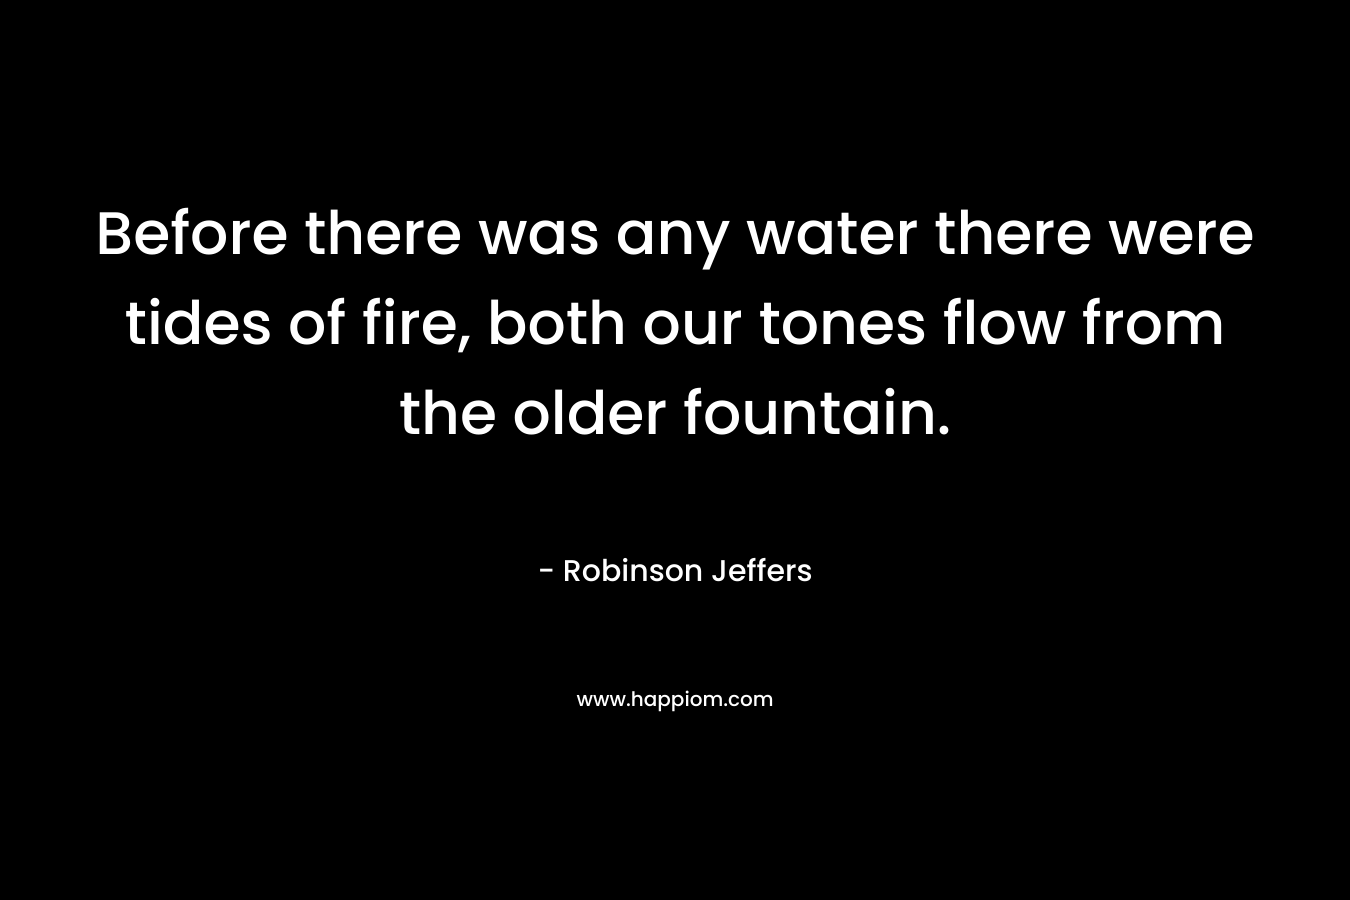 Before there was any water there were tides of fire, both our tones flow from the older fountain.